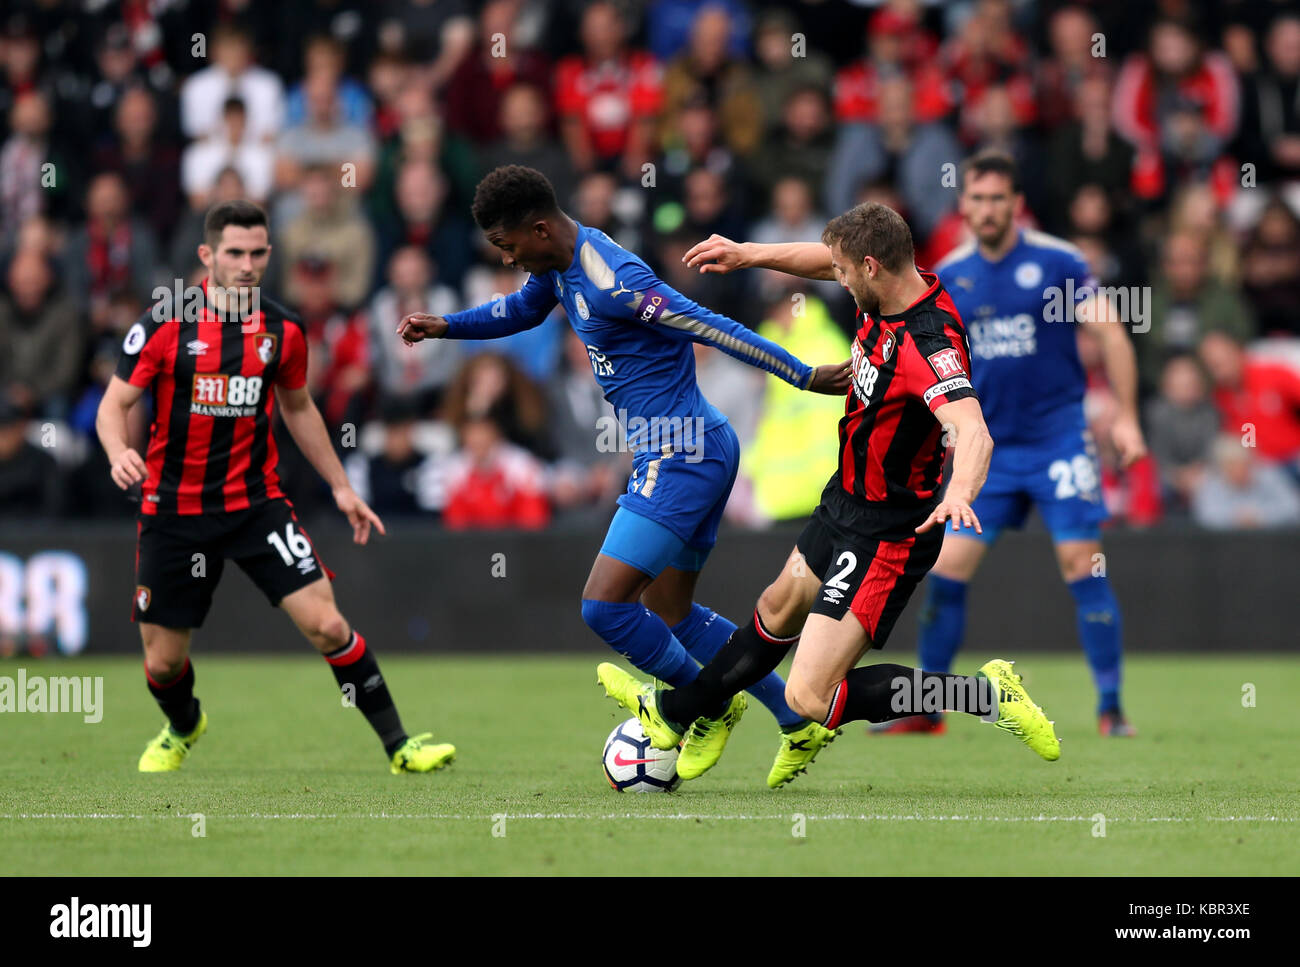 Leicester City's Demarai Gray (left) and AFC Bournemouth's Simon Francis battle for the ball during the Premier League match at the Vitality Stadium, Bournemouth. Stock Photo